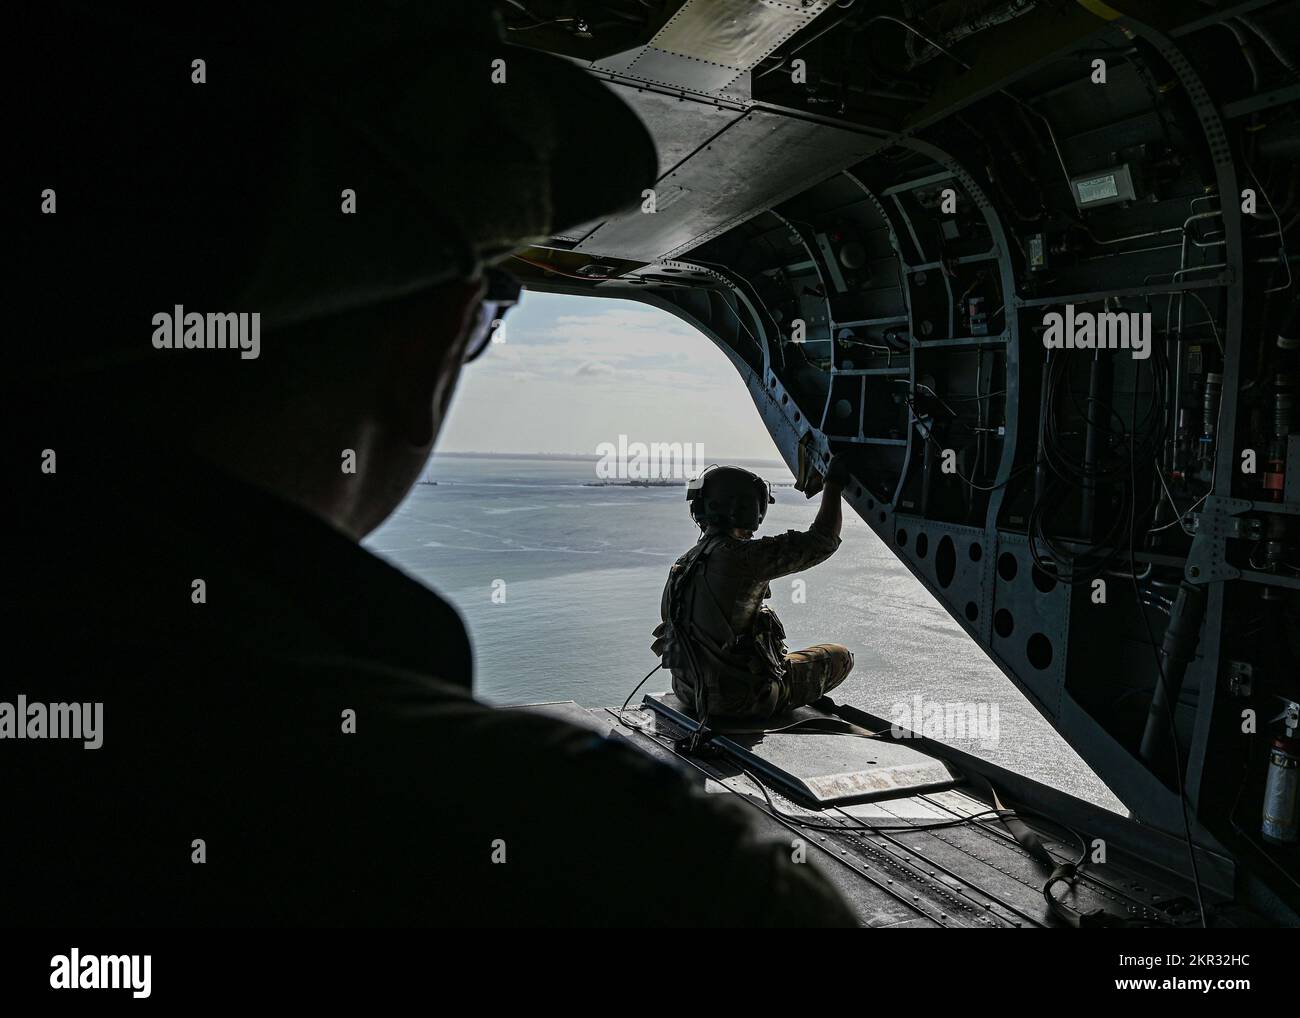 A U.S. Army soldier stands on the rear deck of a U.S. Army CH-47 Chinook as it flies over Virginia Beach, Virginia, while transporting U.S. Air Force Airmen assigned to the 355th Wing during Bushwhacker 22-07, Nov. 5, 2022. The Chinook and its aircrew made multiple trips a day delivering Airmen and equipment to the various simulated contingency locations during the exercise. (U.S. Air Force photo by Airman 1st Class Paige Weldon) Stock Photo